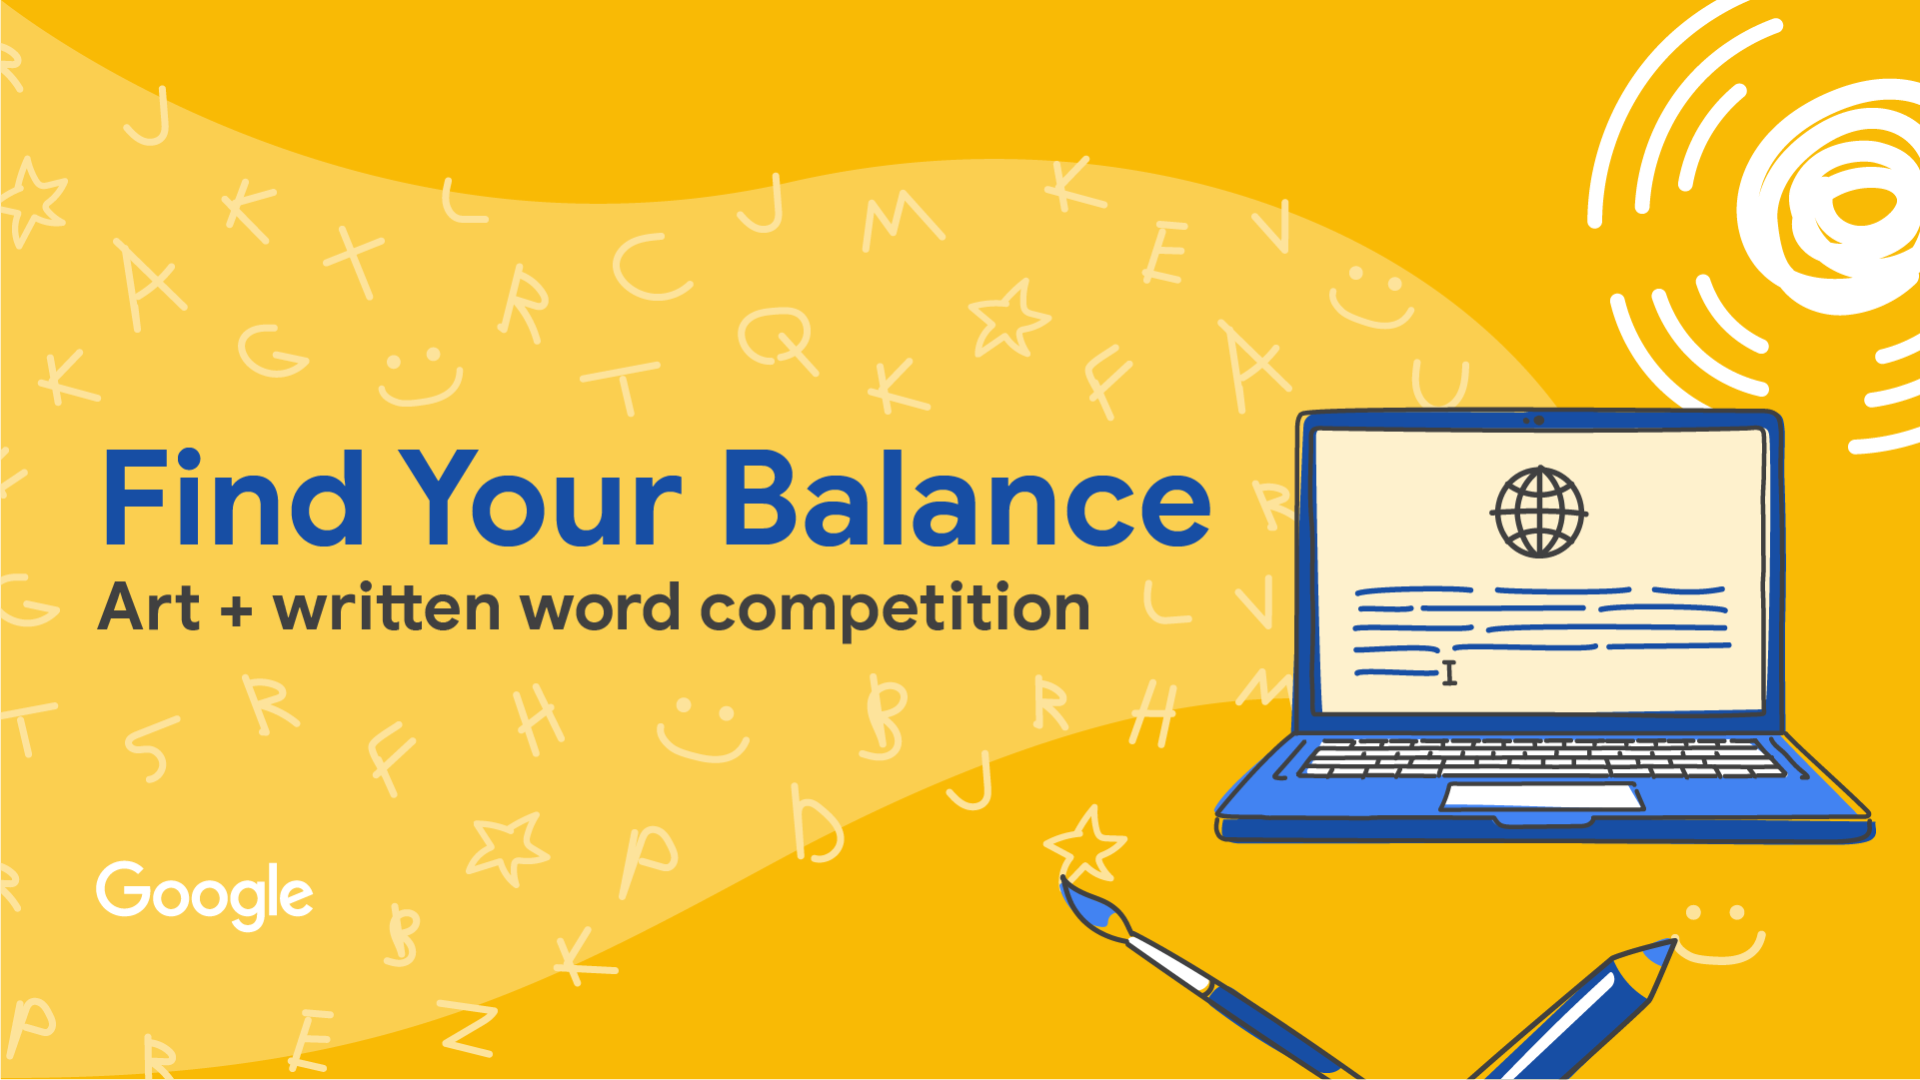 Find Your Balance Competition